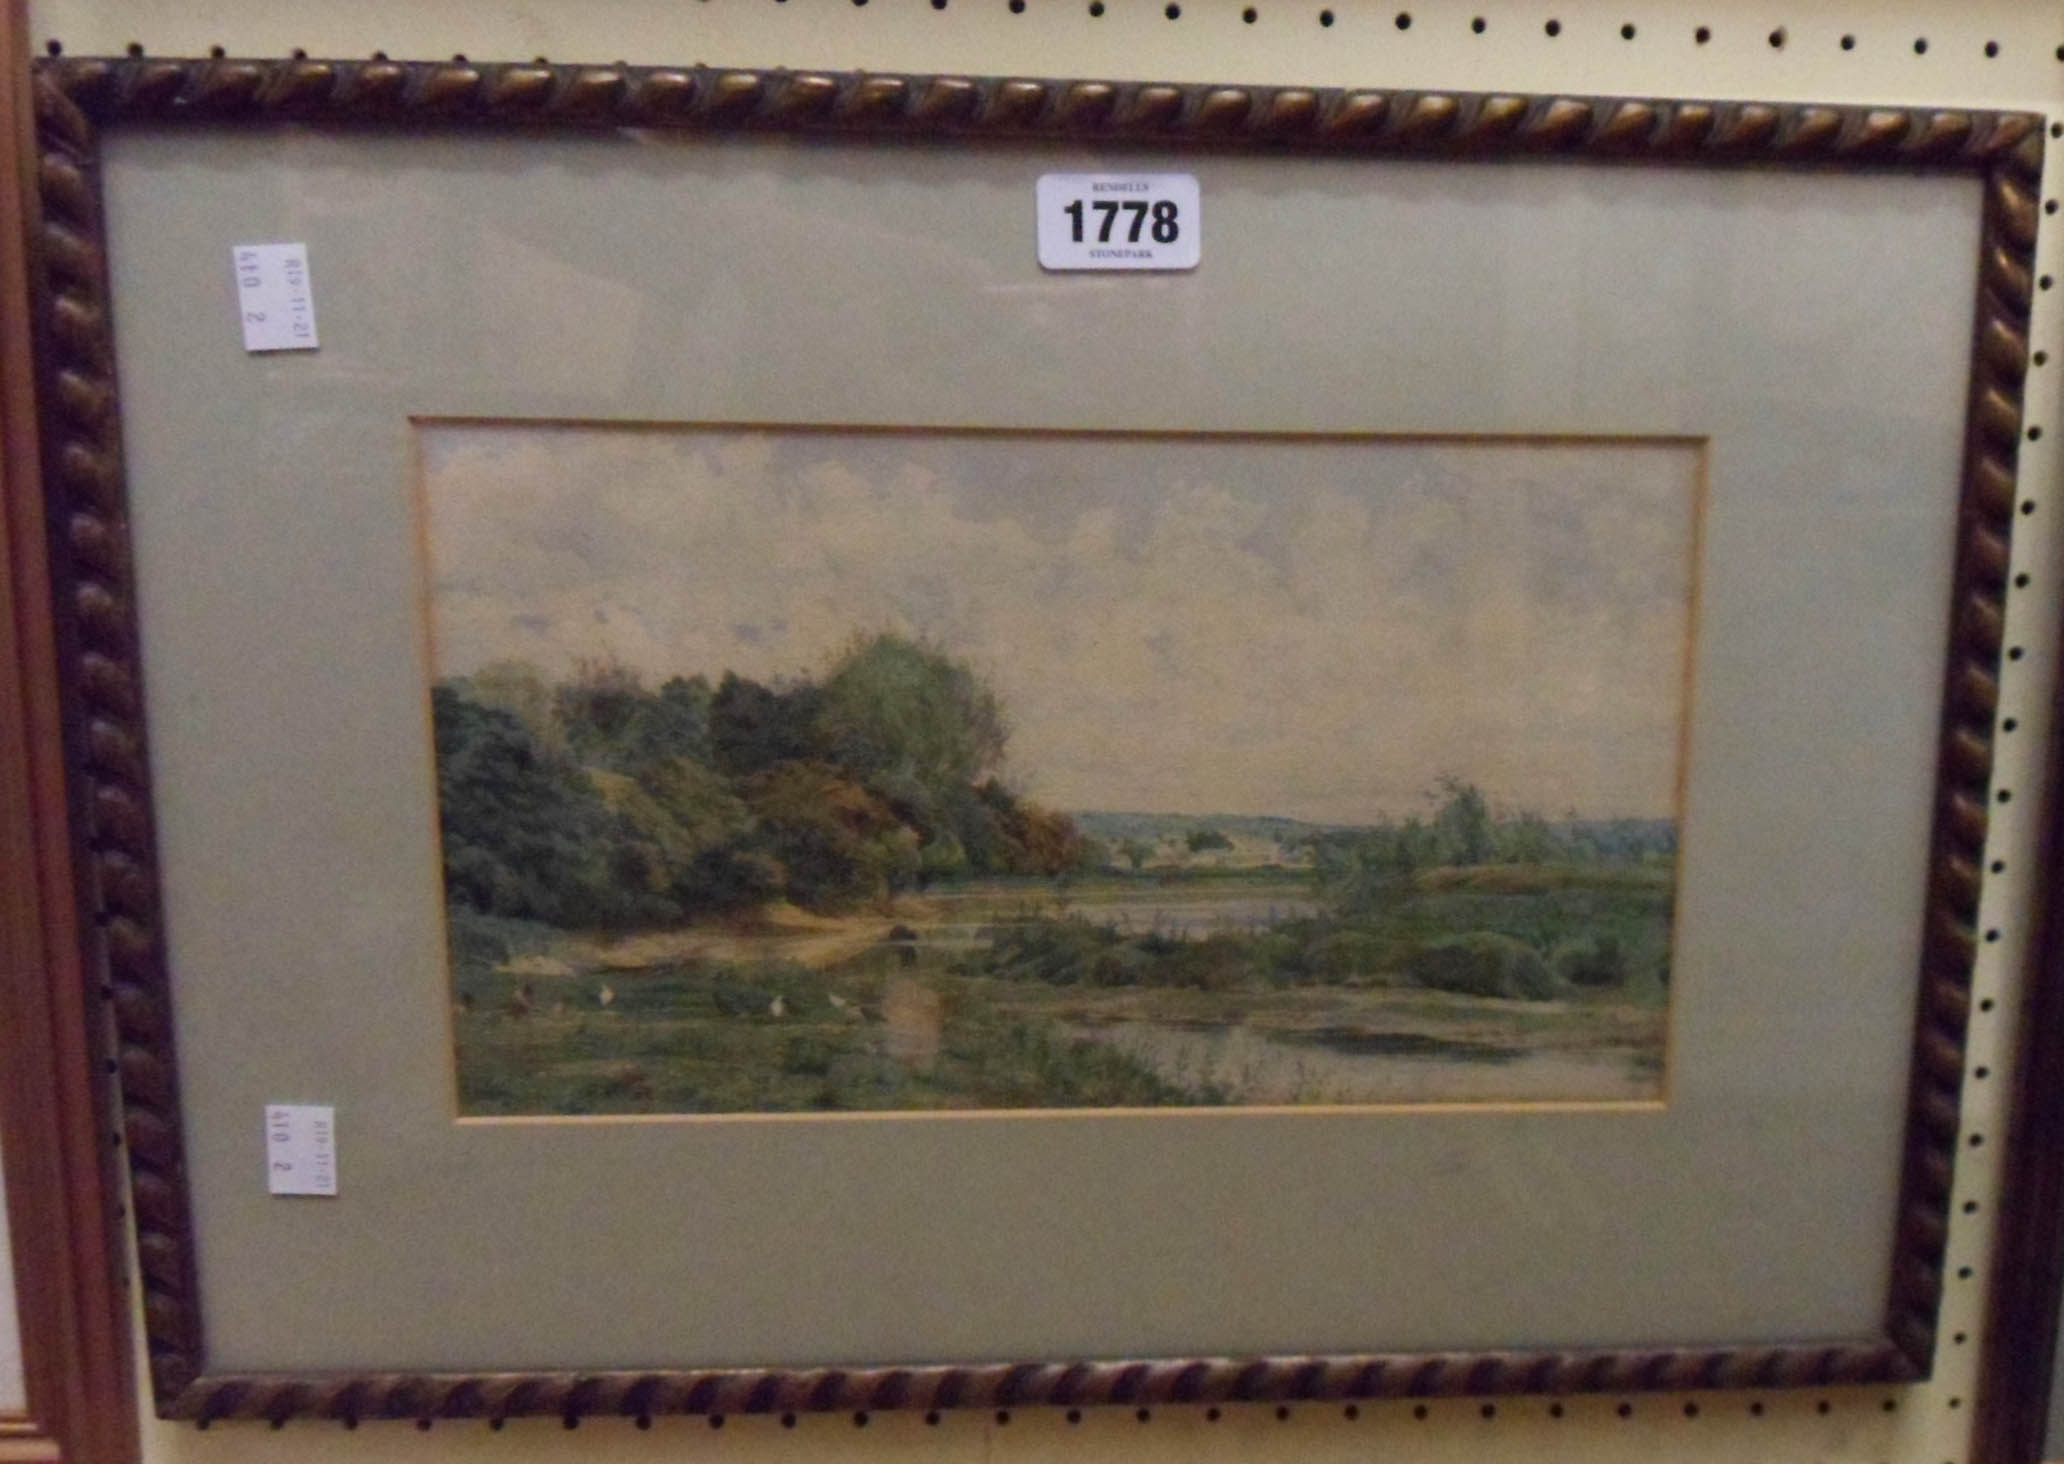 A. Shelley: a gilt framed watercolour, depicting a river landscape - signed and dated 1879